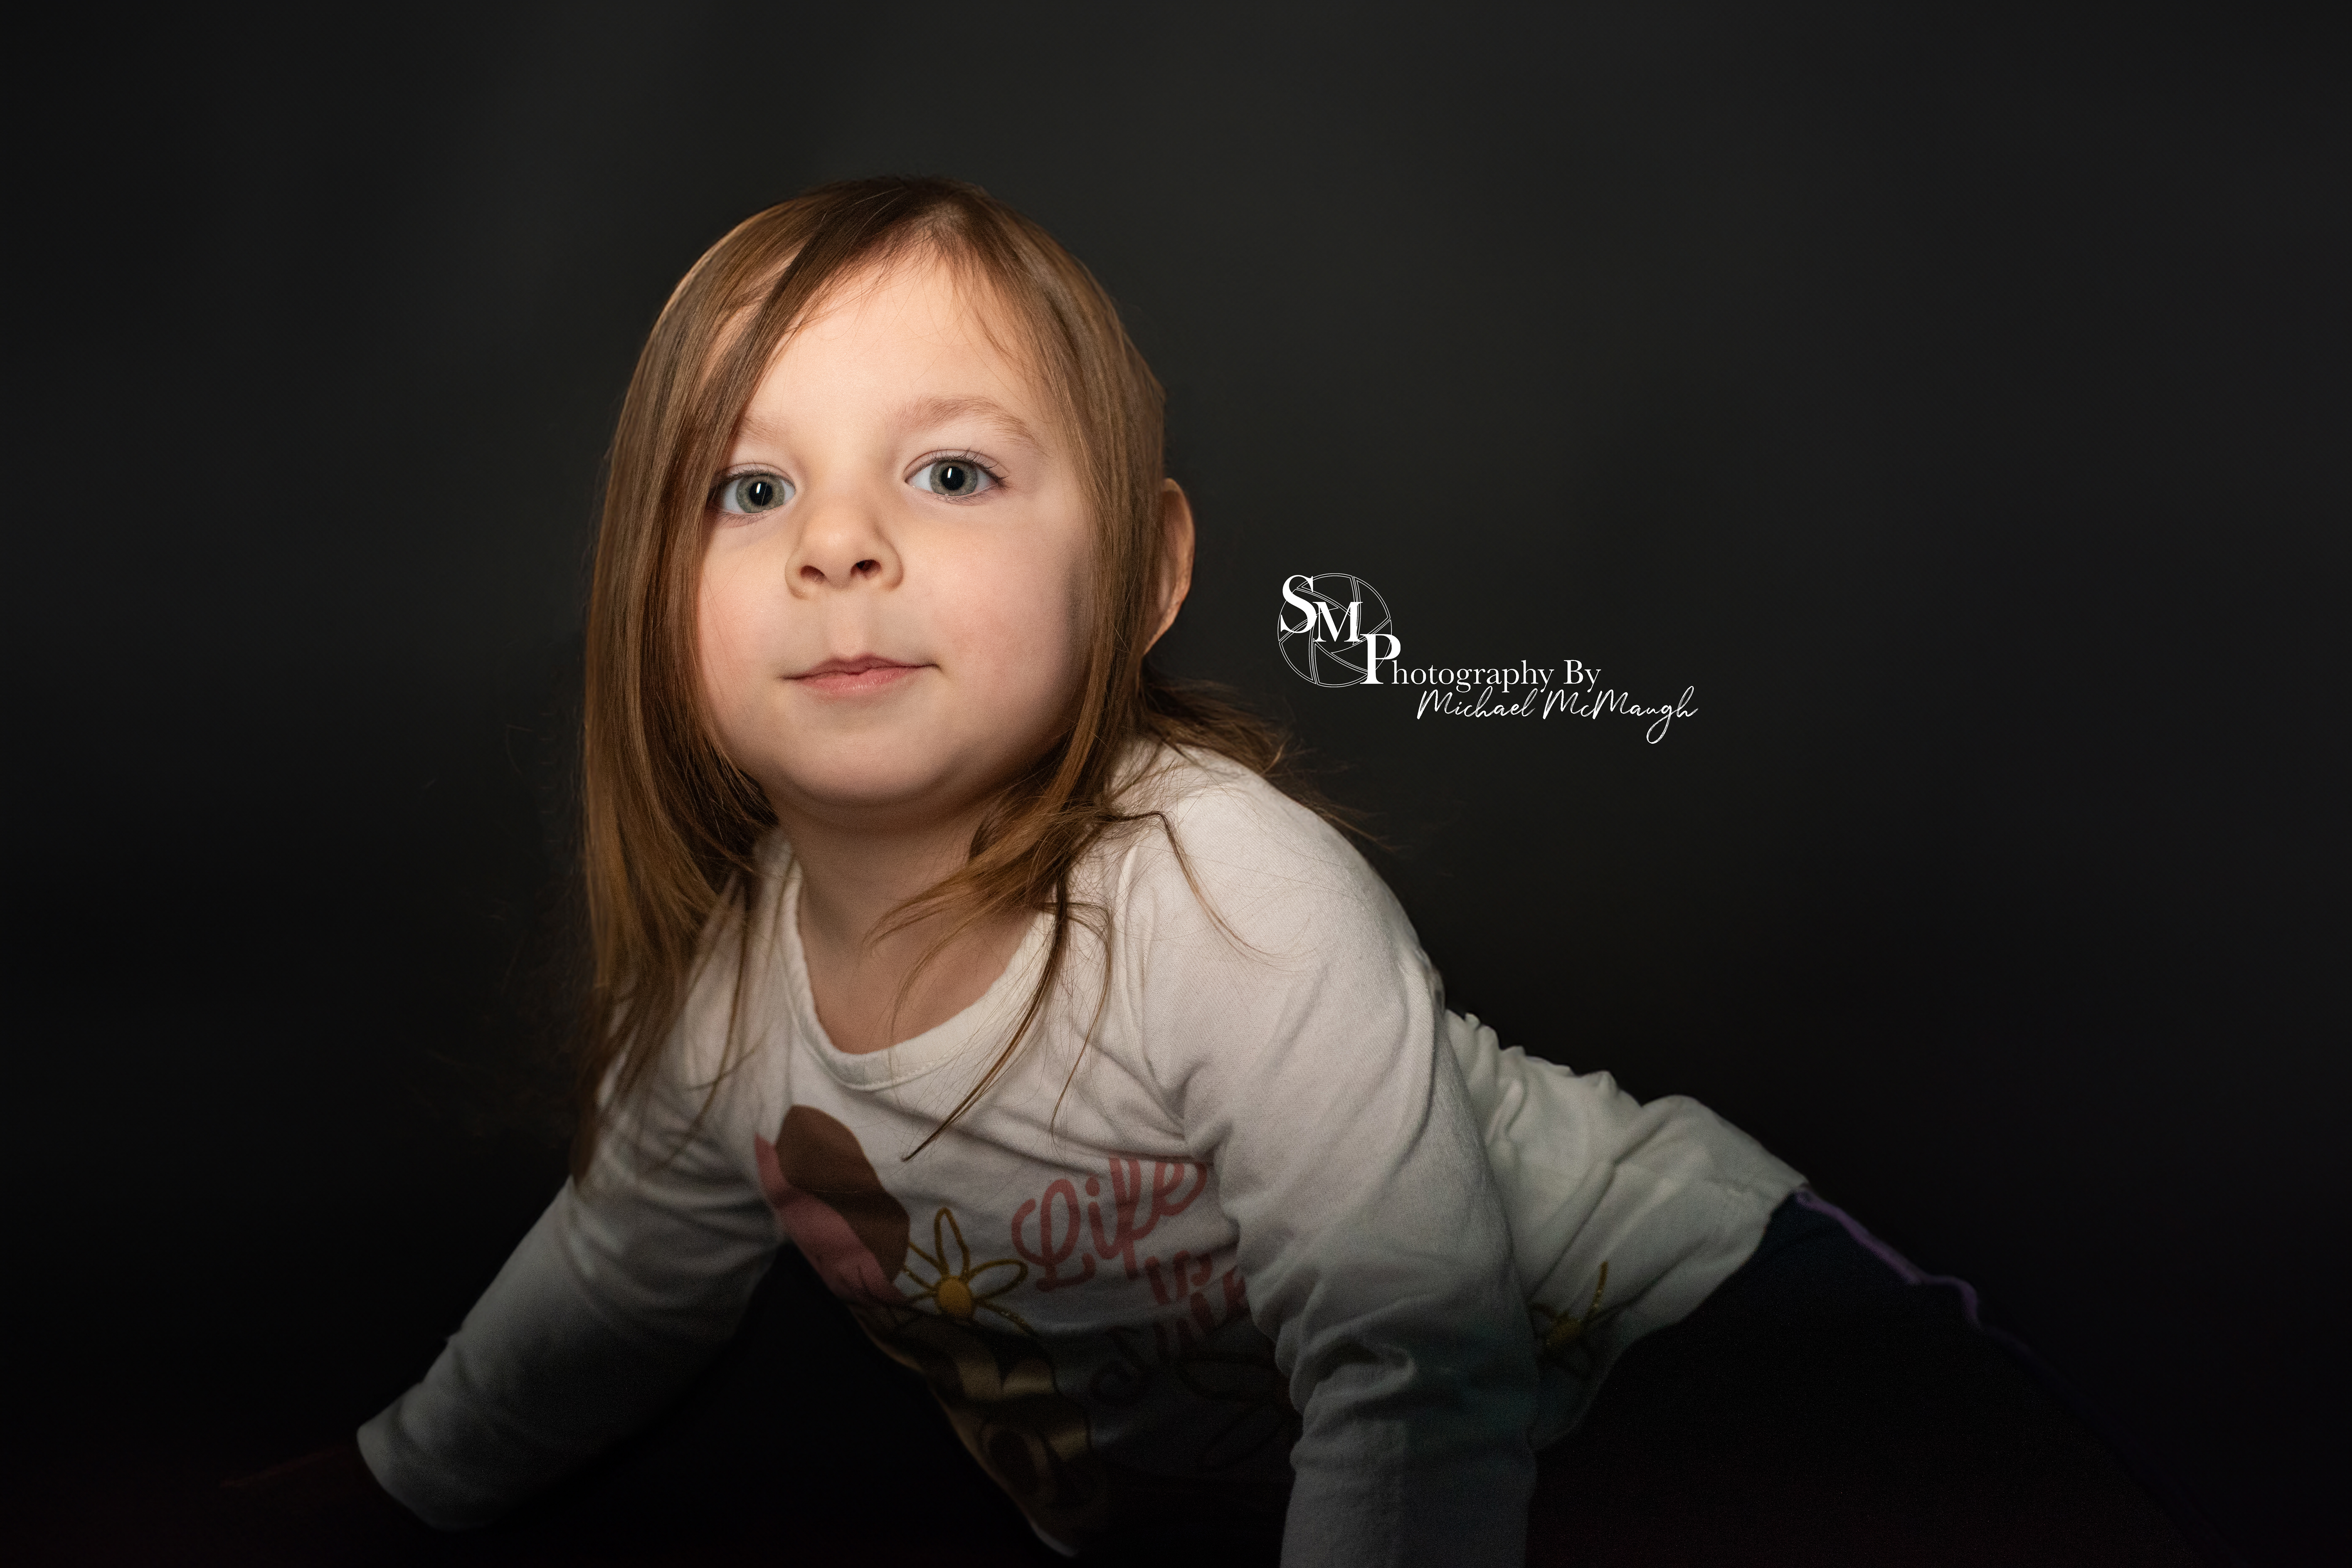 Child Portrait shot by Michael McMaugh of Shuttering Moments. Michael has been a photographer for over 20 years and works in various industries creating content for business and individuals.